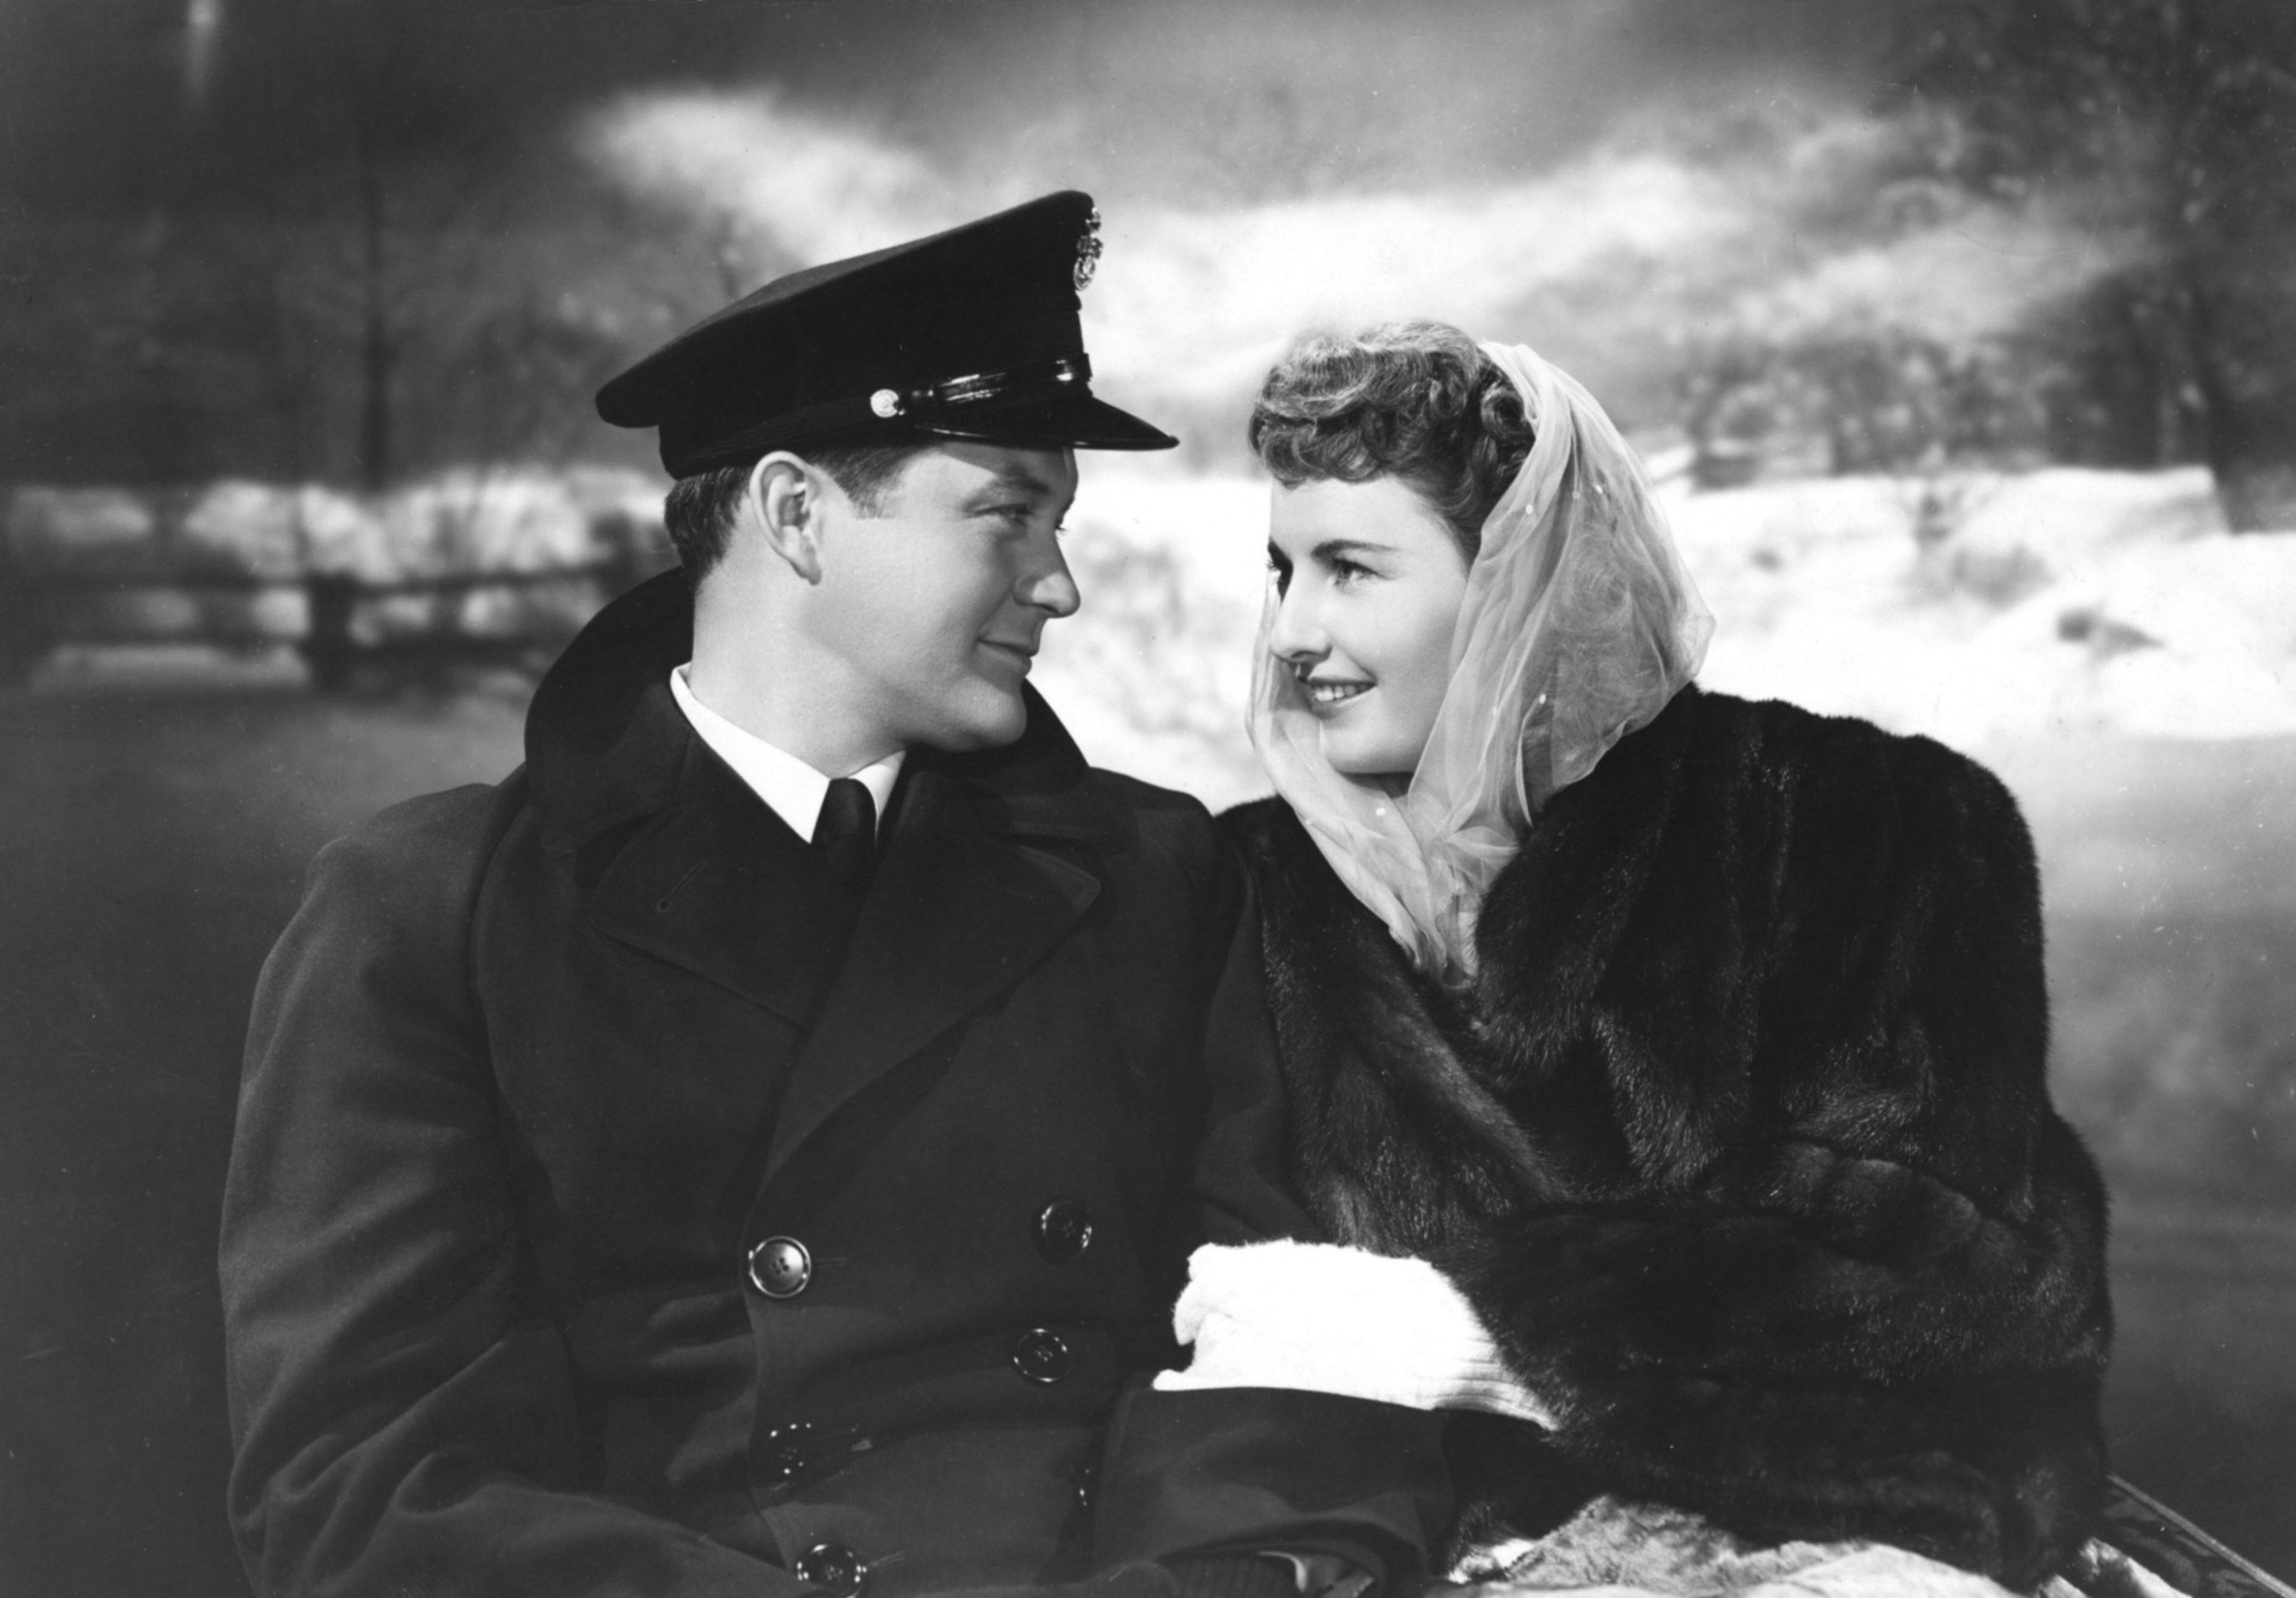 Dennis Morgan and Barbara Stanwyck staring lovingly at each other.